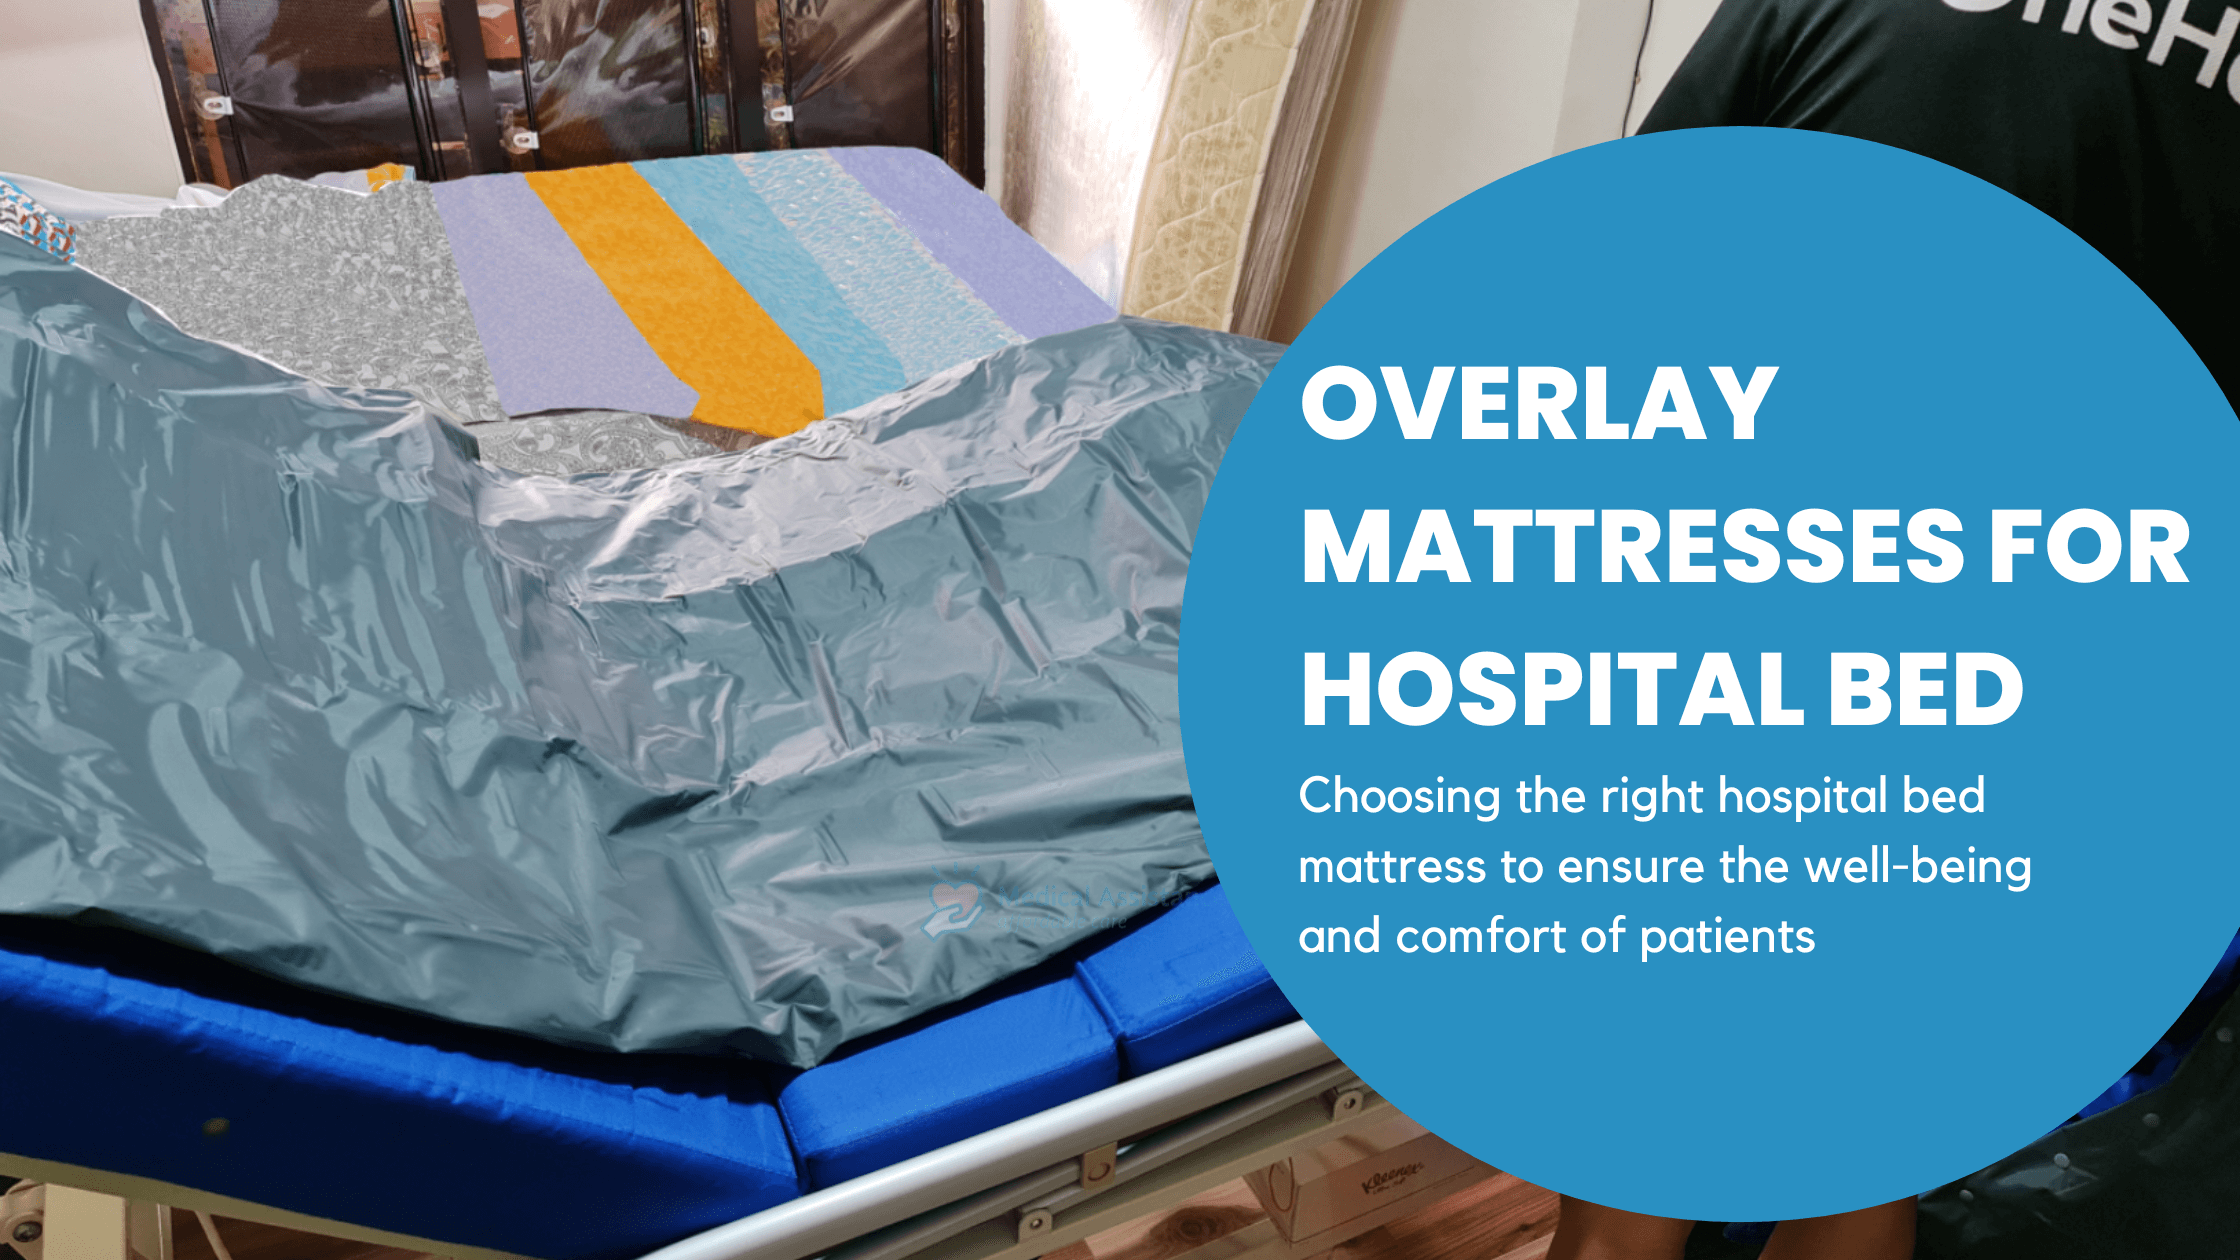 Overlay mattresses for hospital beds